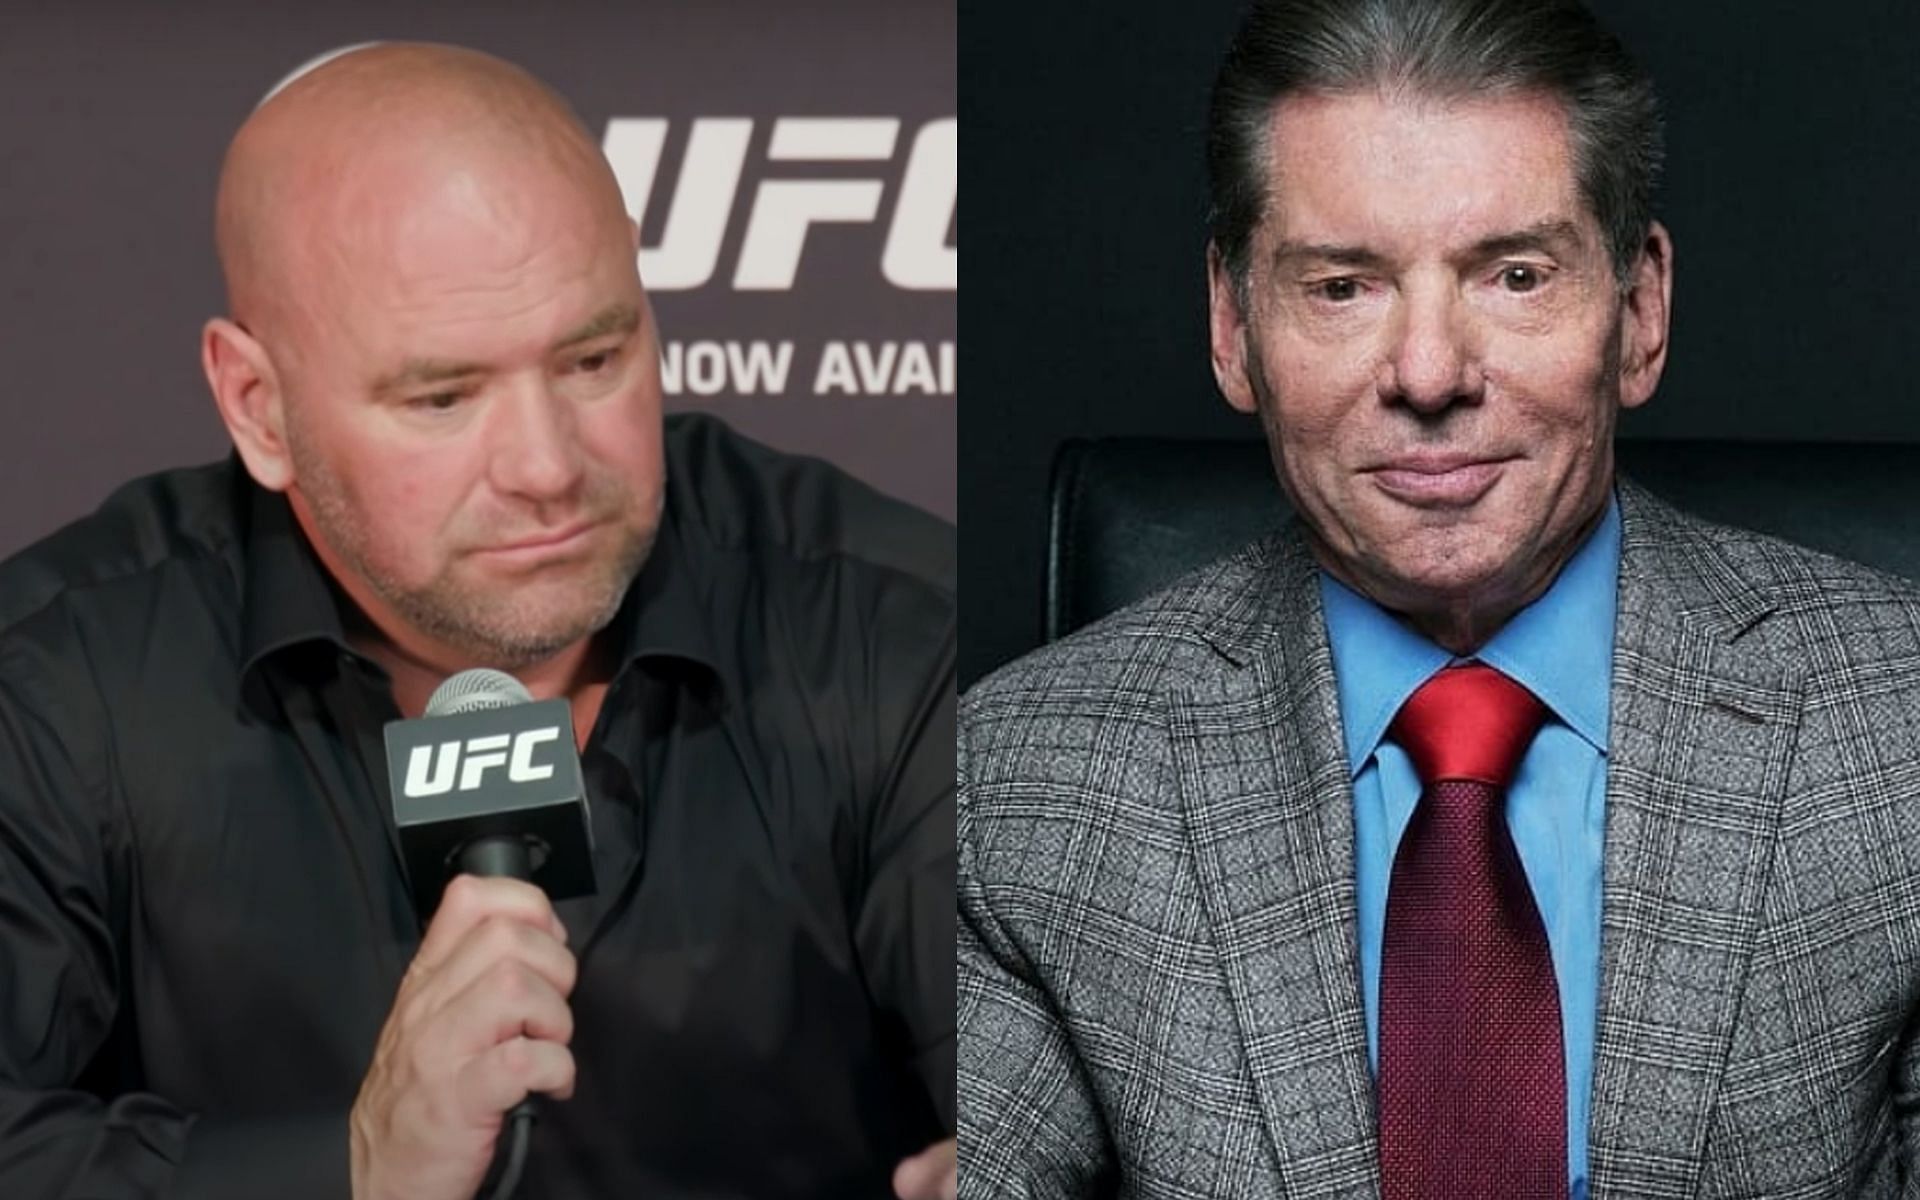 Dana White (left) and Vince McMahon (right) (Images via UFC YouTube and @VinceMcMahon X)